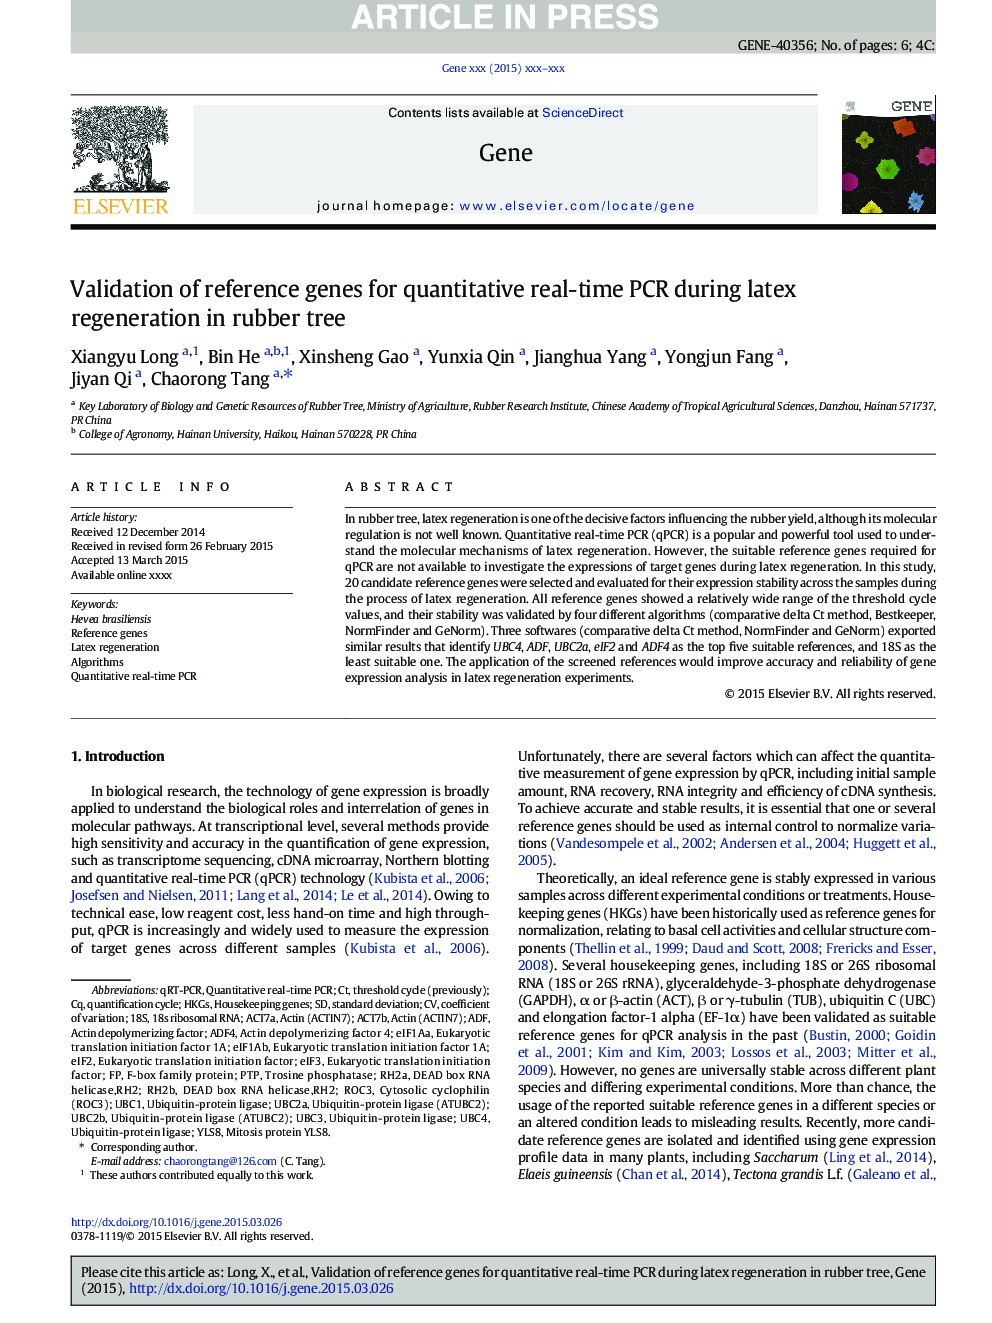 Validation of reference genes for quantitative real-time PCR during latex regeneration in rubber tree